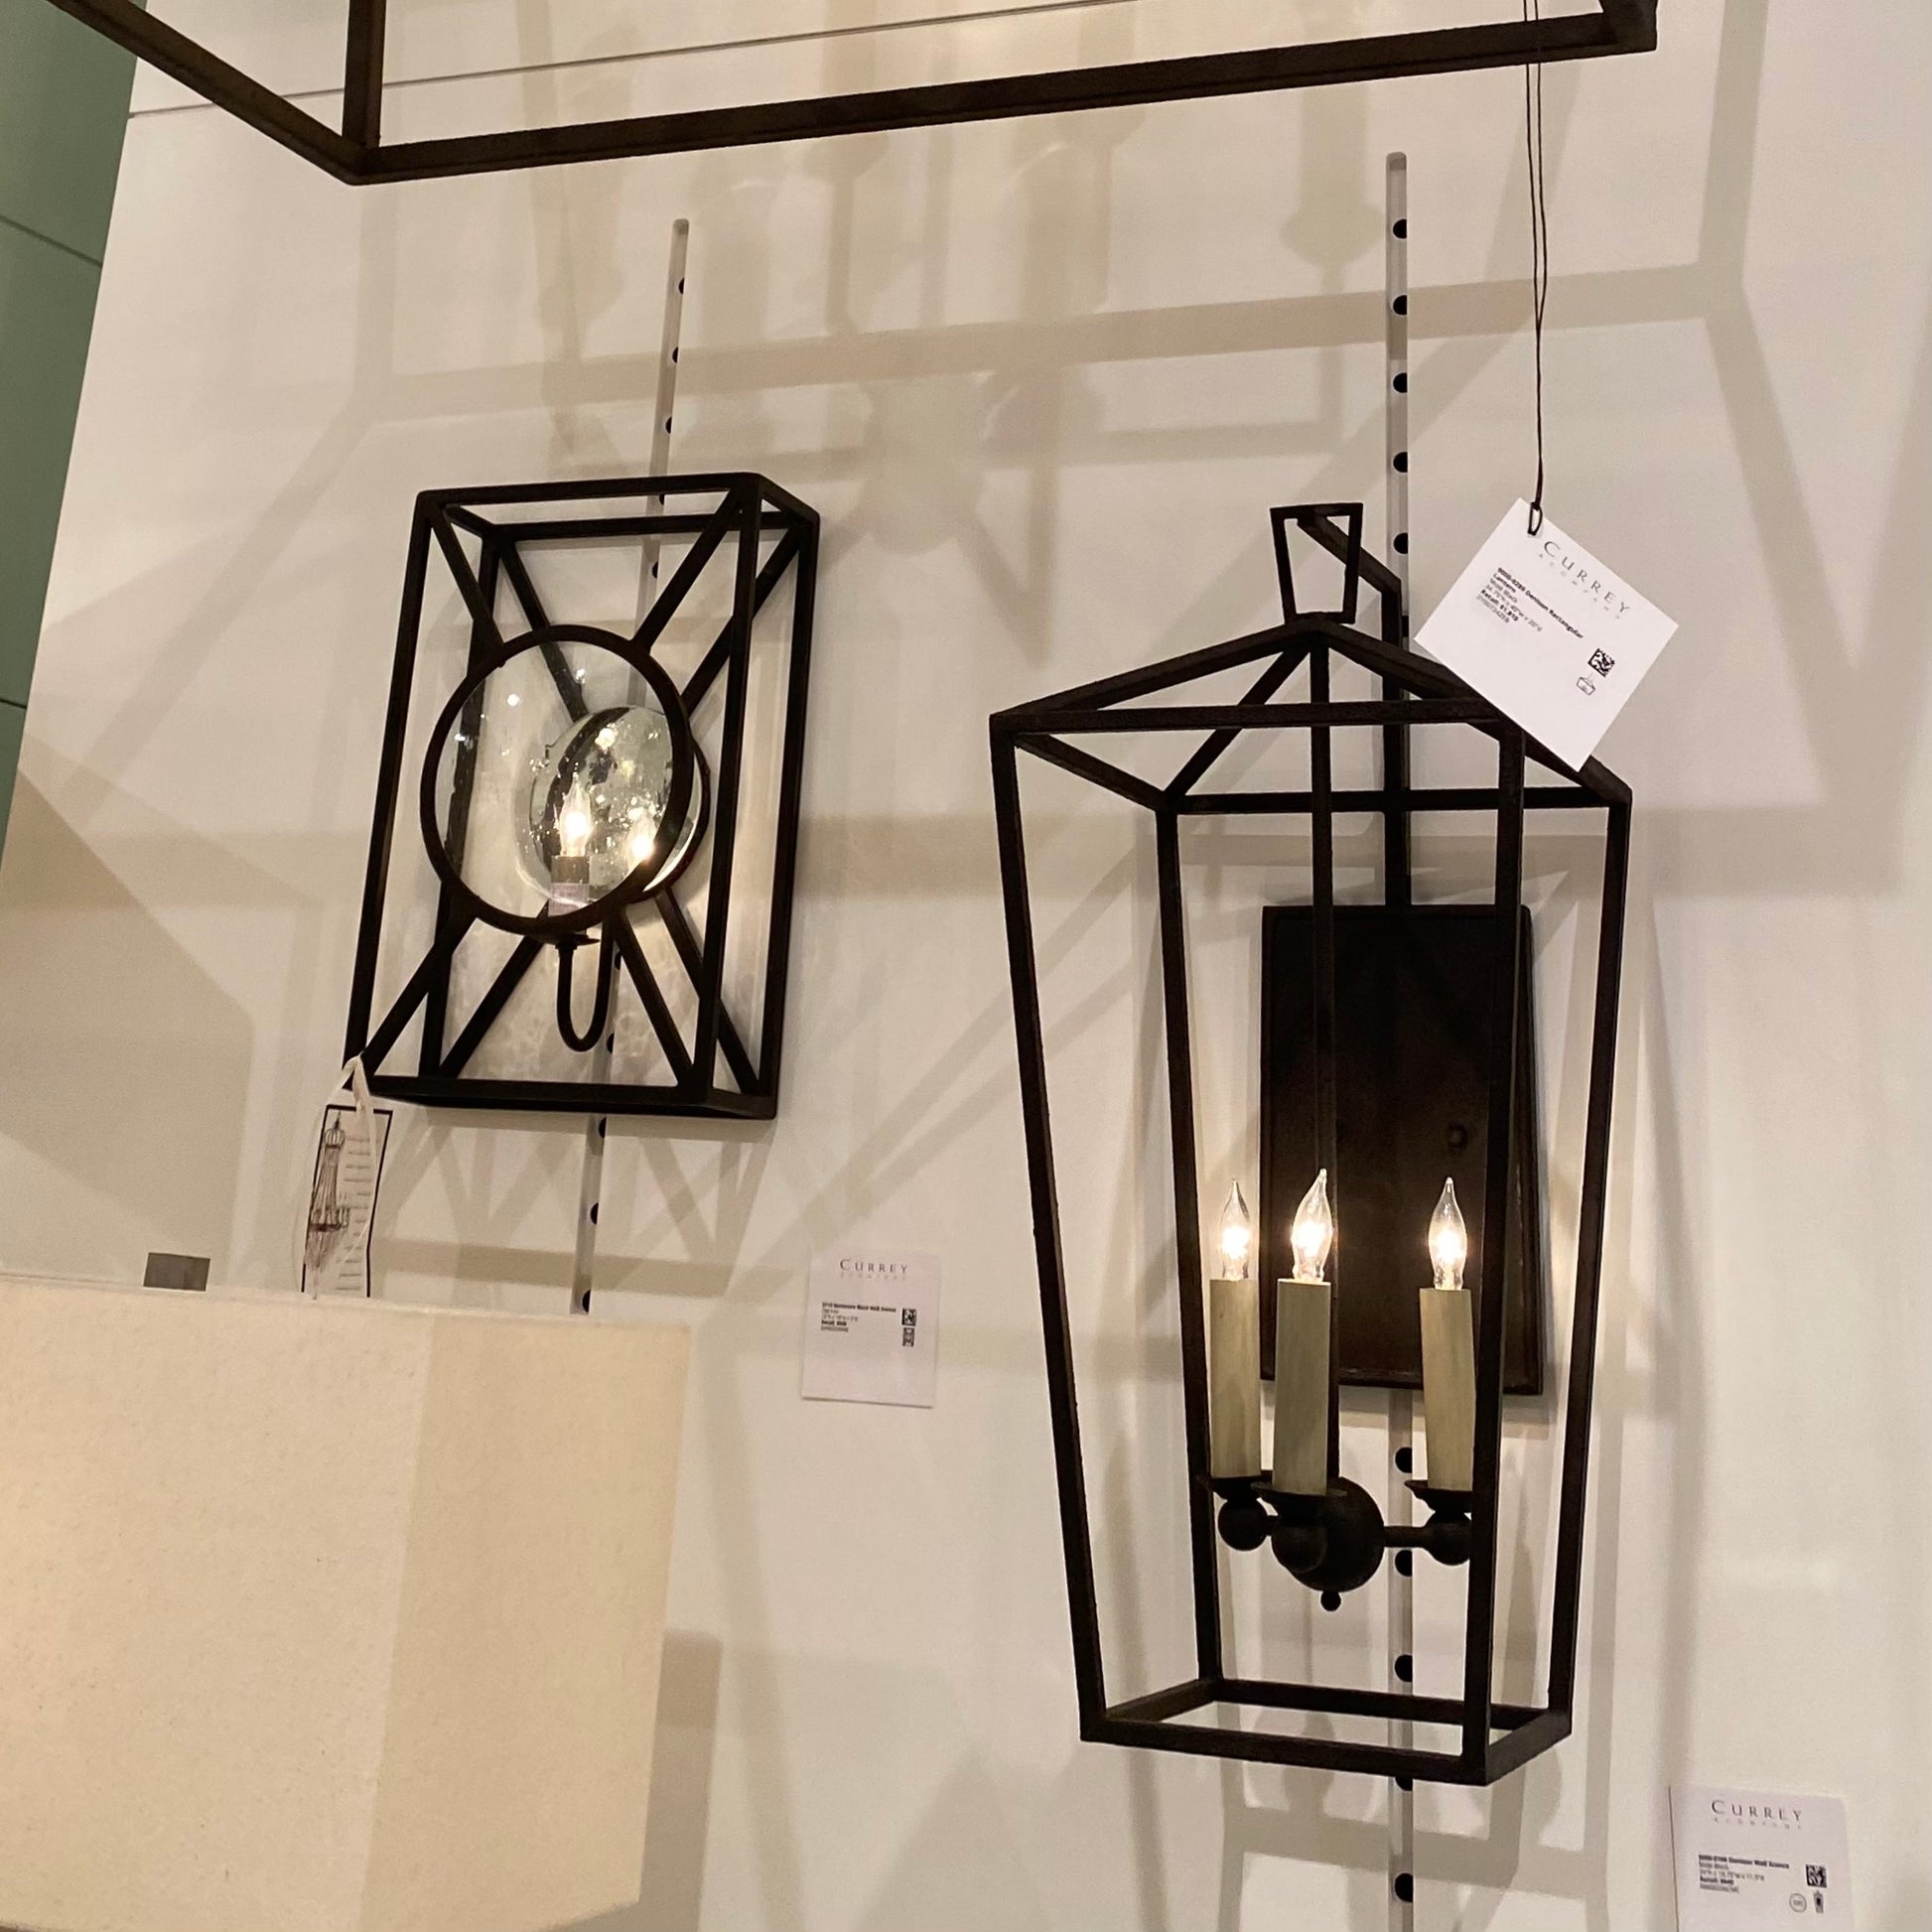 currey and company Denison wall sconce showroom